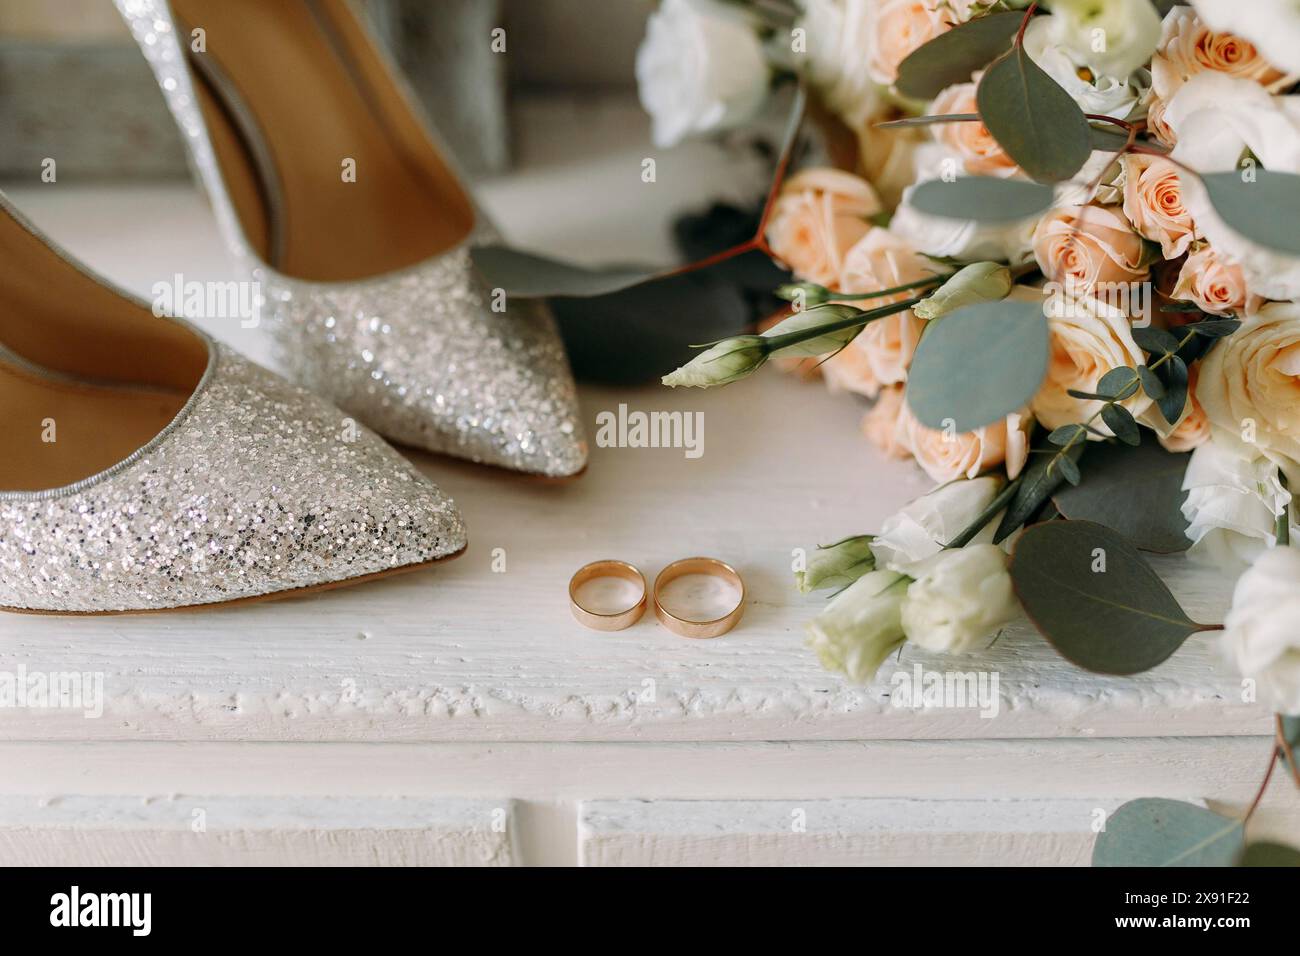 Elegant glitter shoes and wedding rings placed near a wedding bouquet of white flowers and peach roses with eucalyptus leaves on a wooden surface Stock Photo